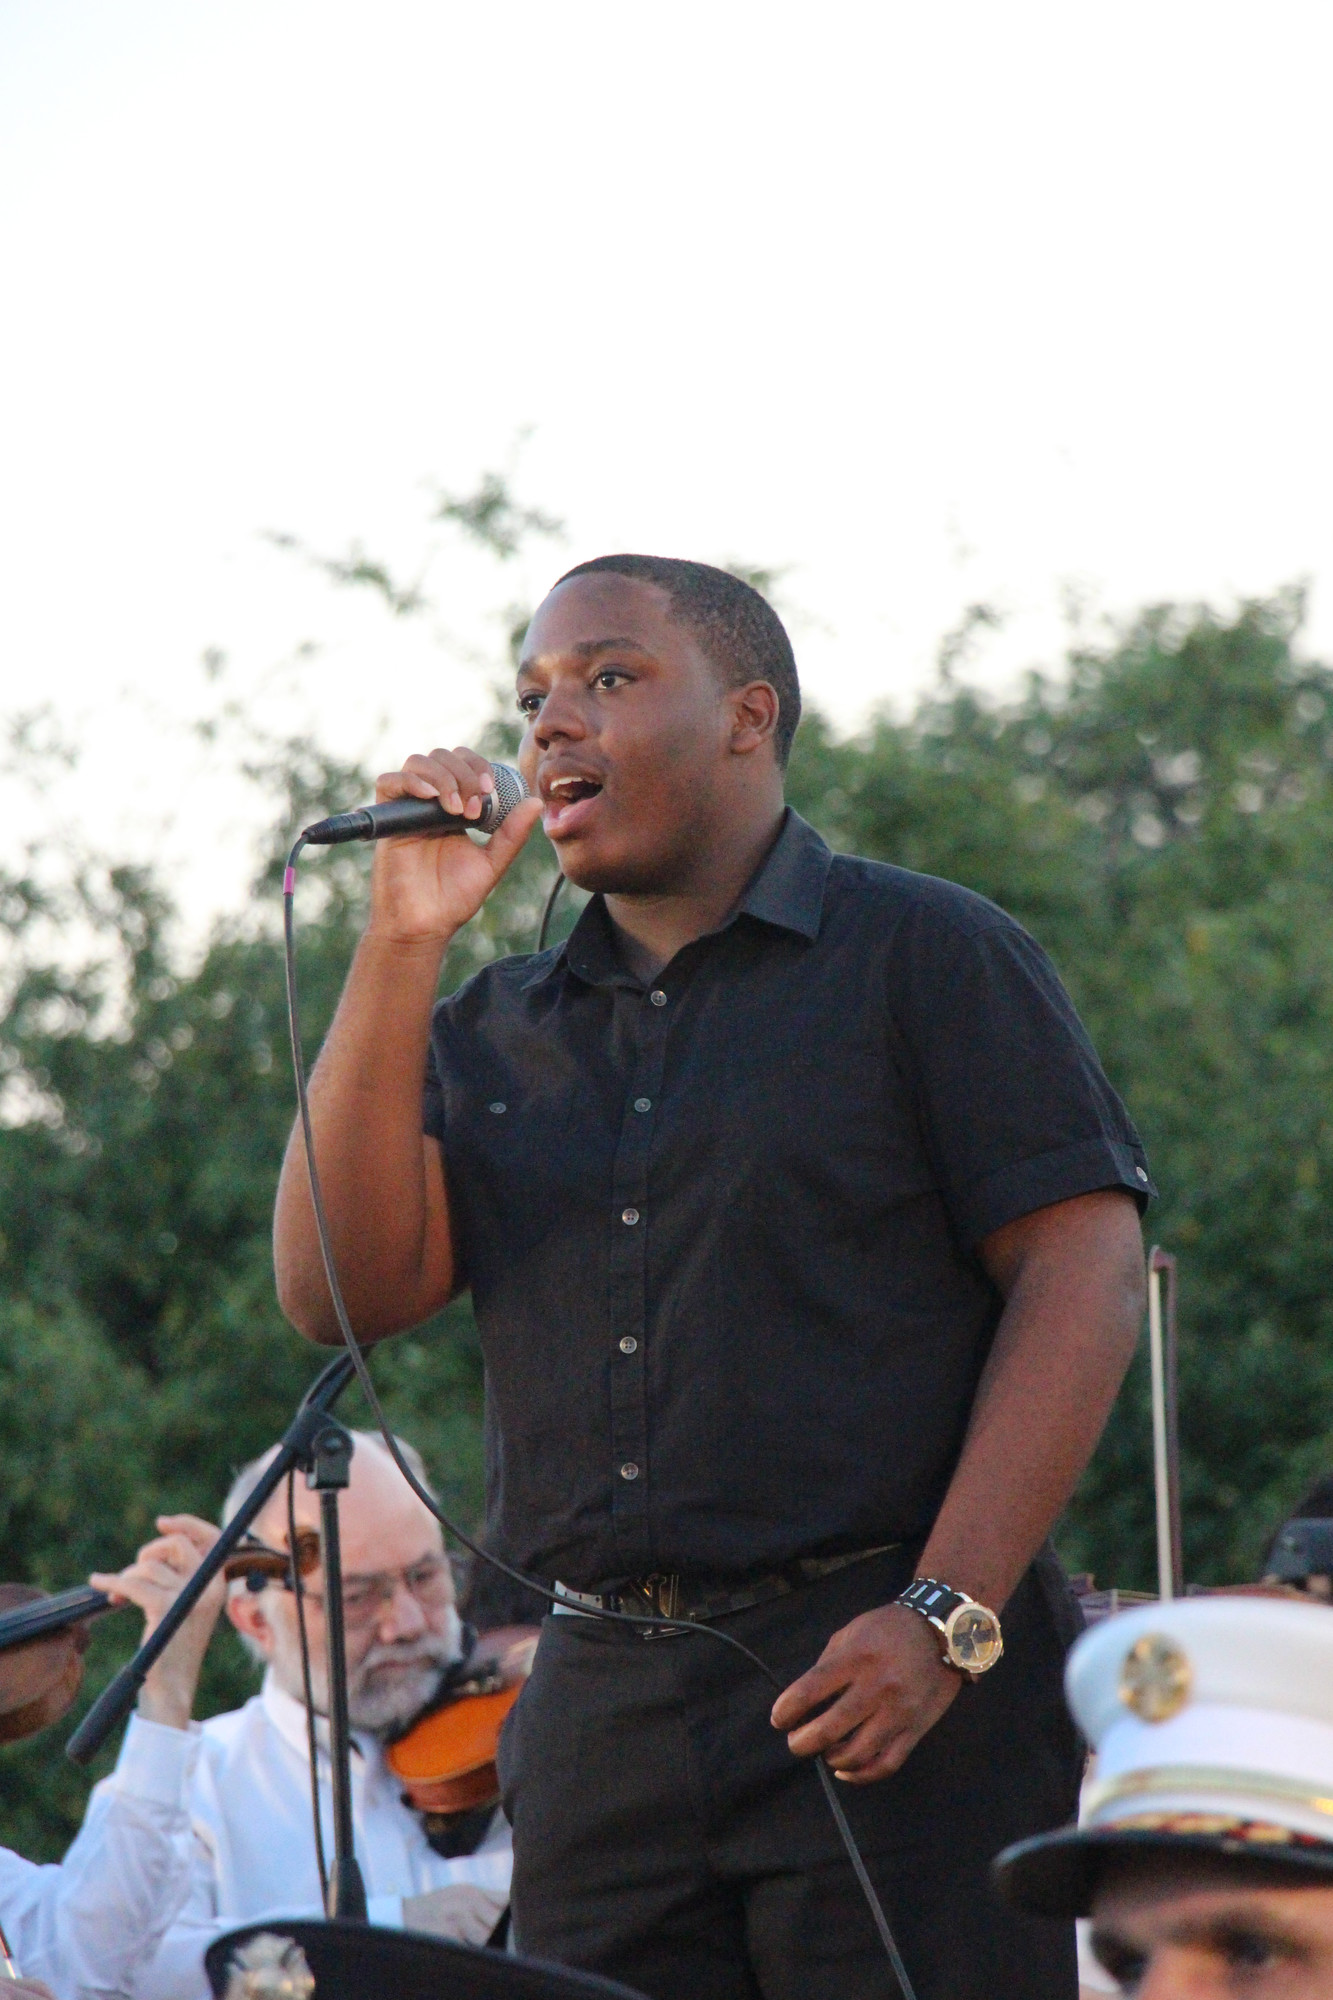 Craig Joseph opened up the concert while singing the national anthem.